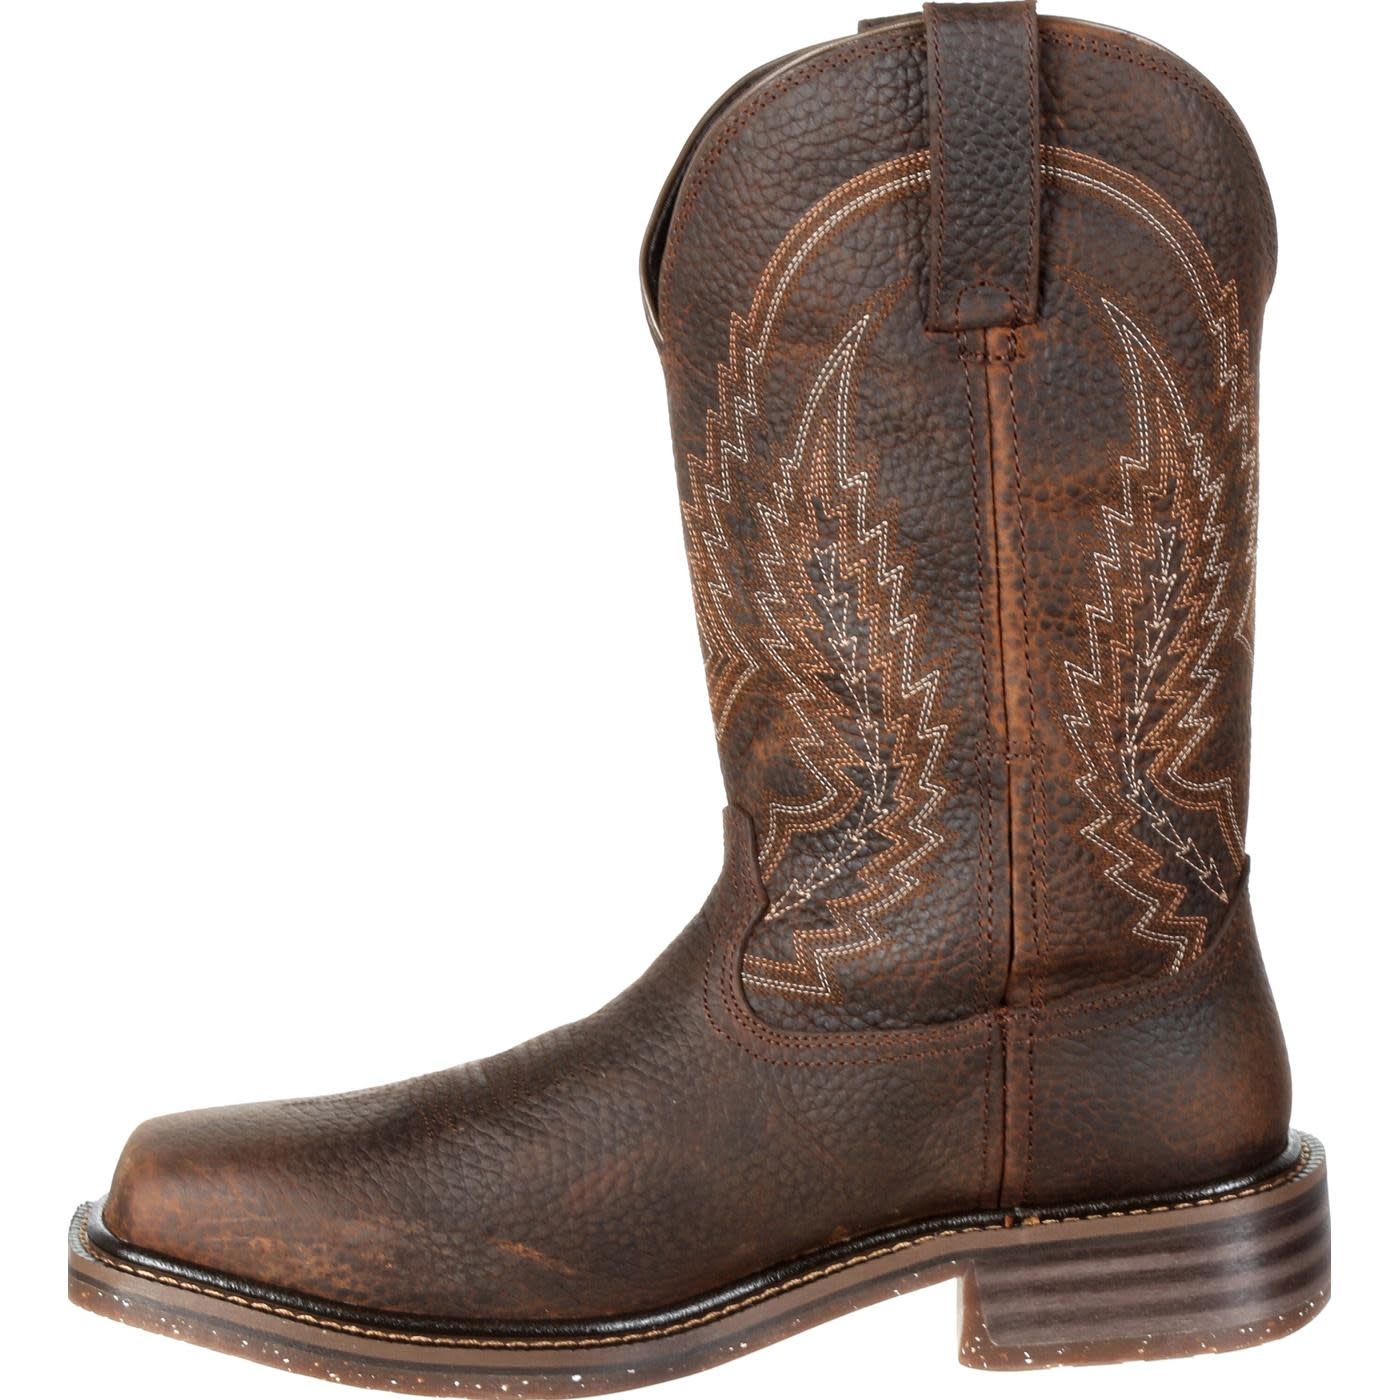 Rocky Riverbend RKW0228 Men's Boots 